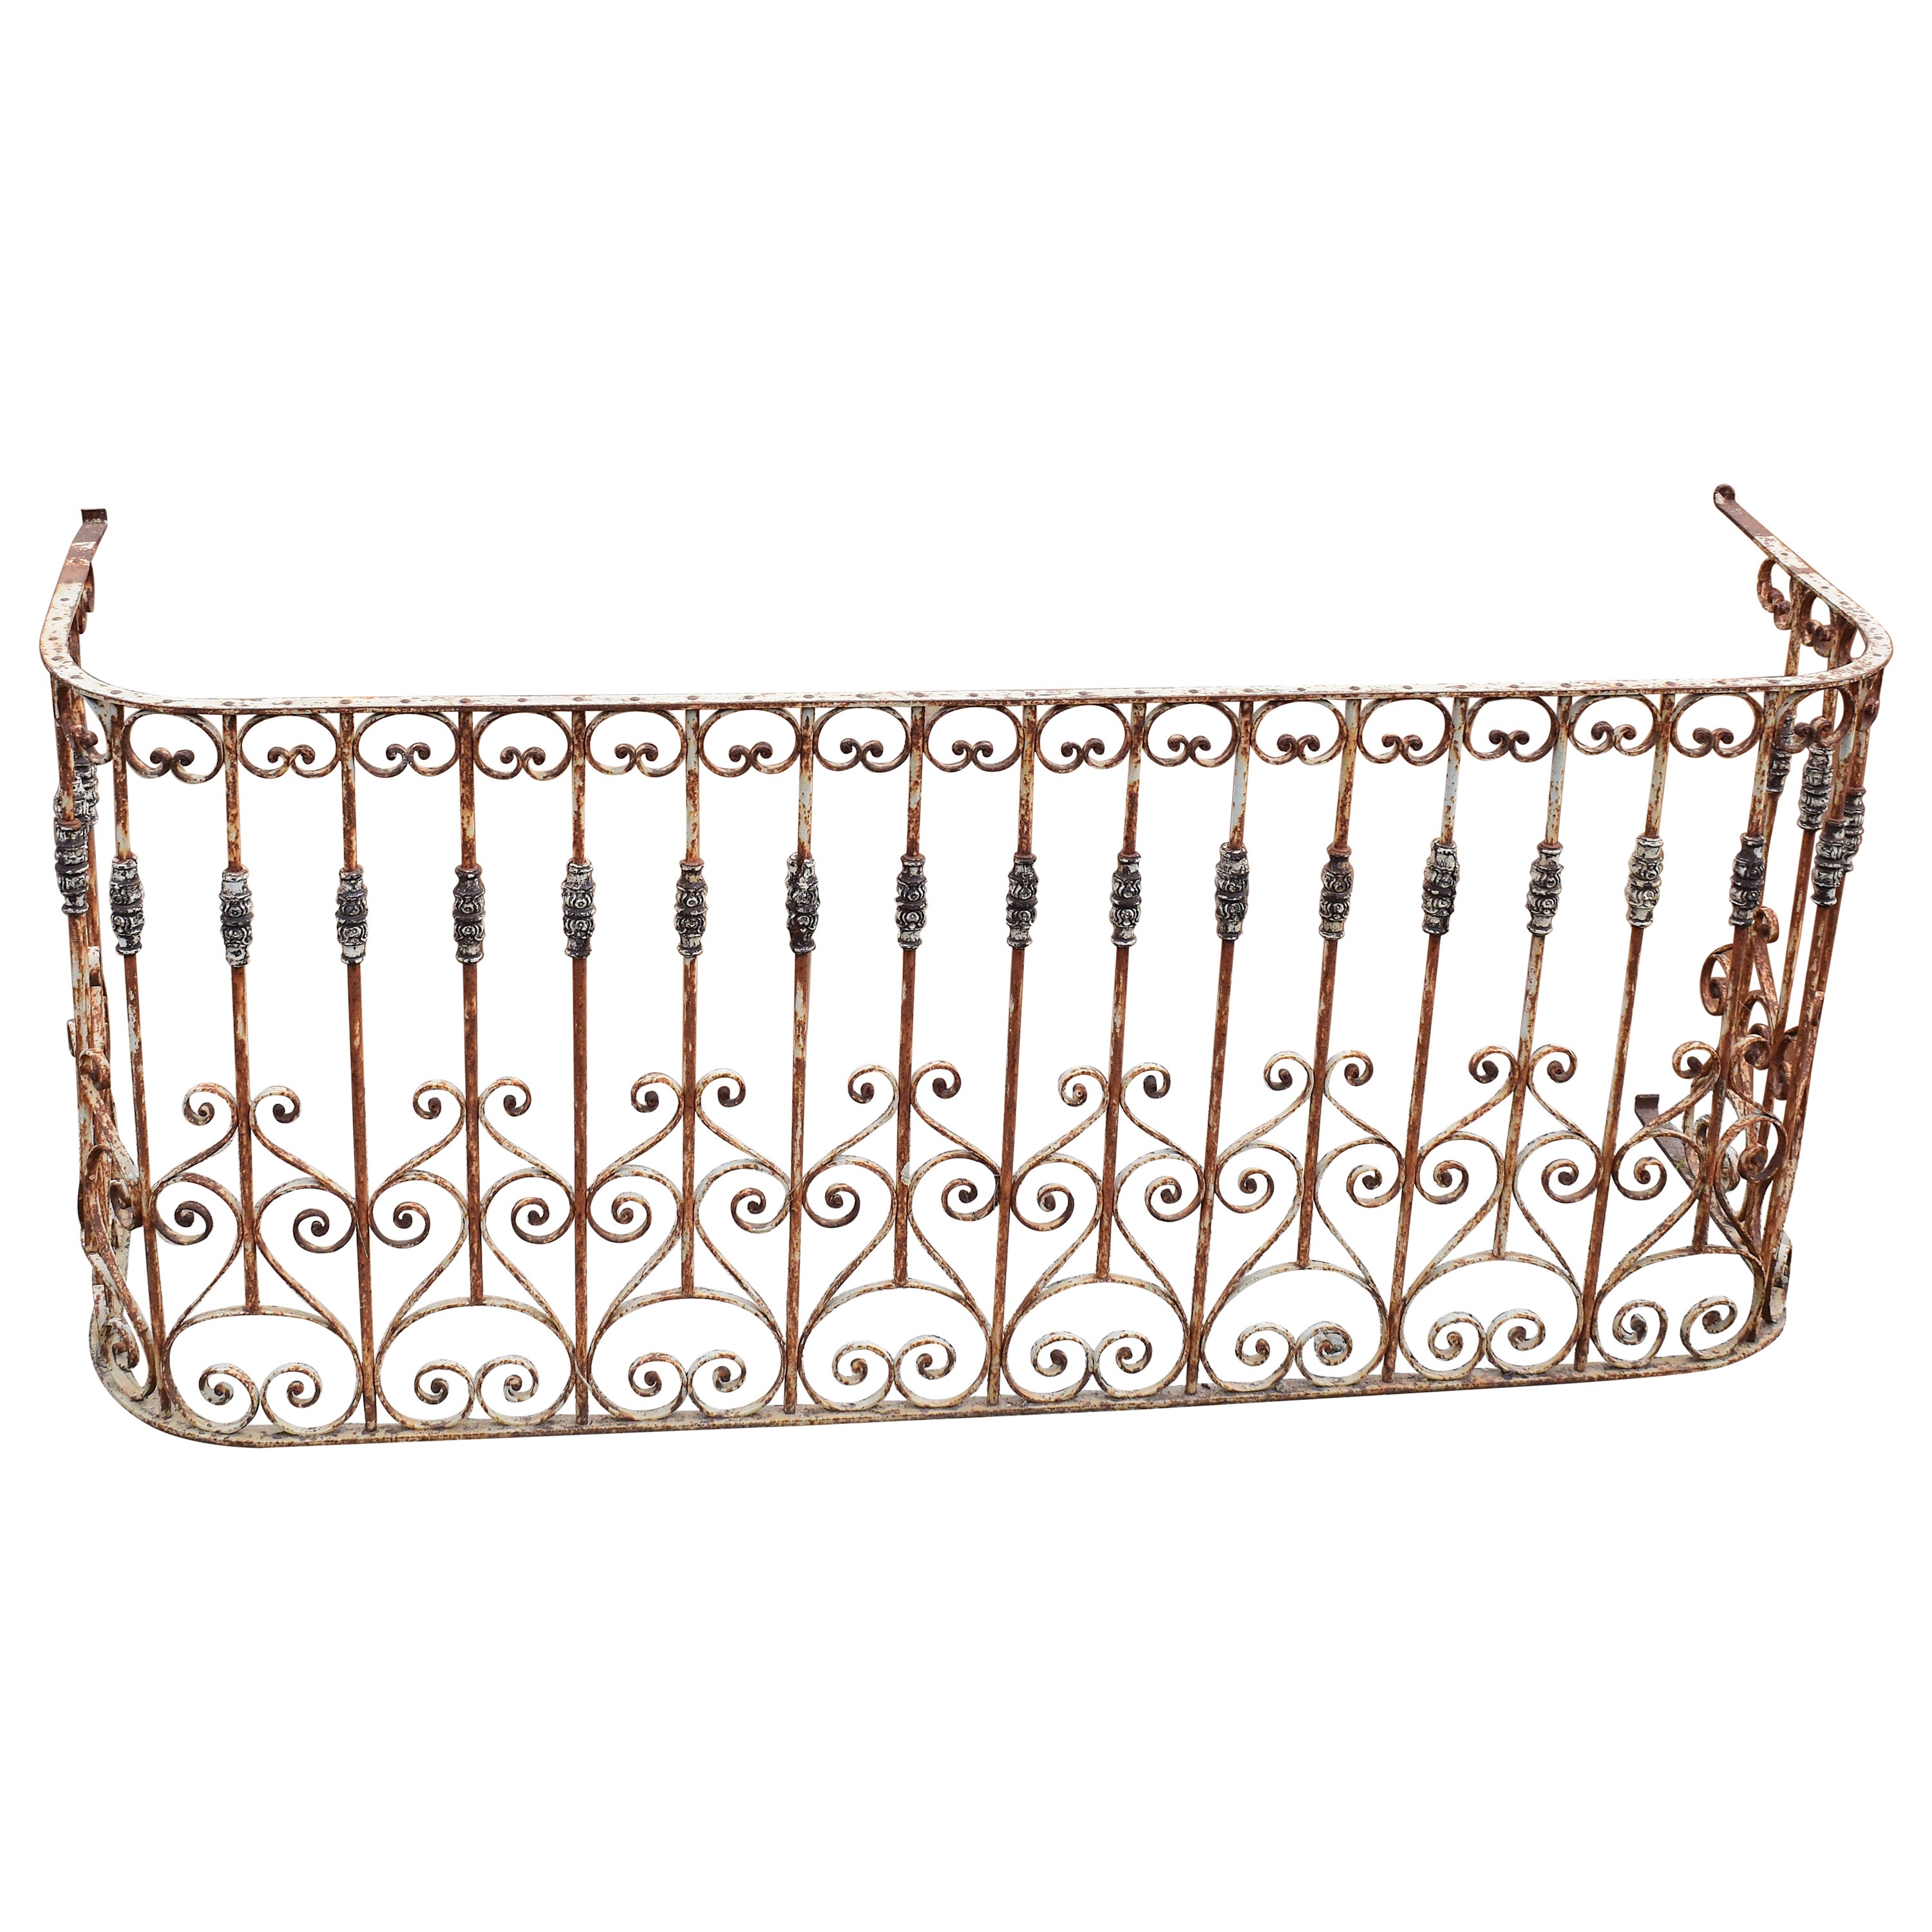 Antique White French Wrought Iron Balcony Railing, 19th Century For Sale